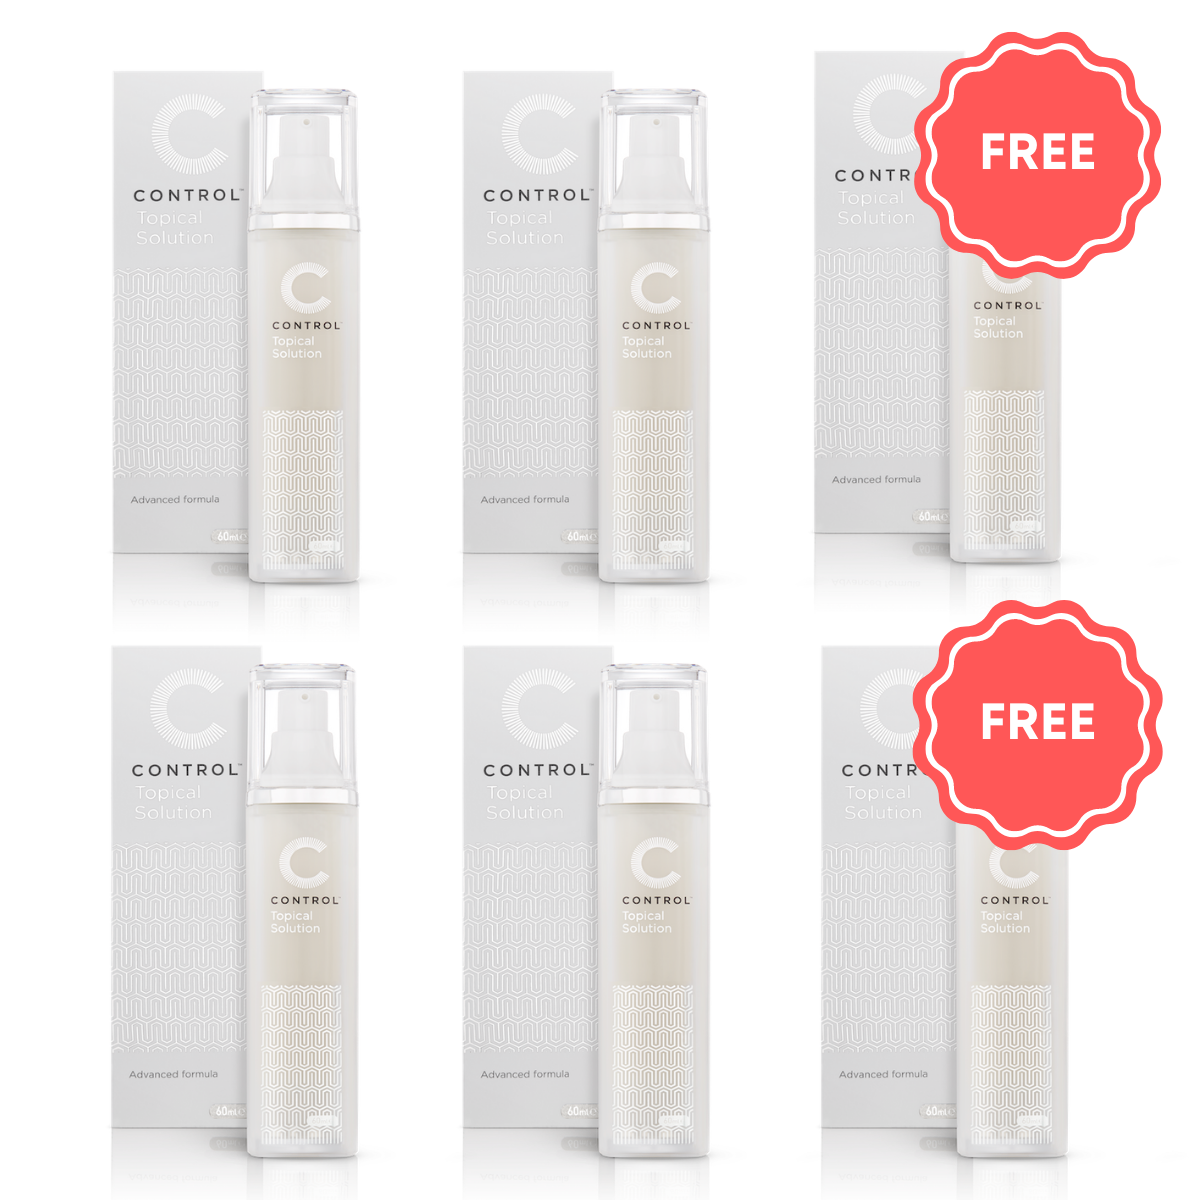 Control Topical Solution™ - Buy 4 Get 2 Free!